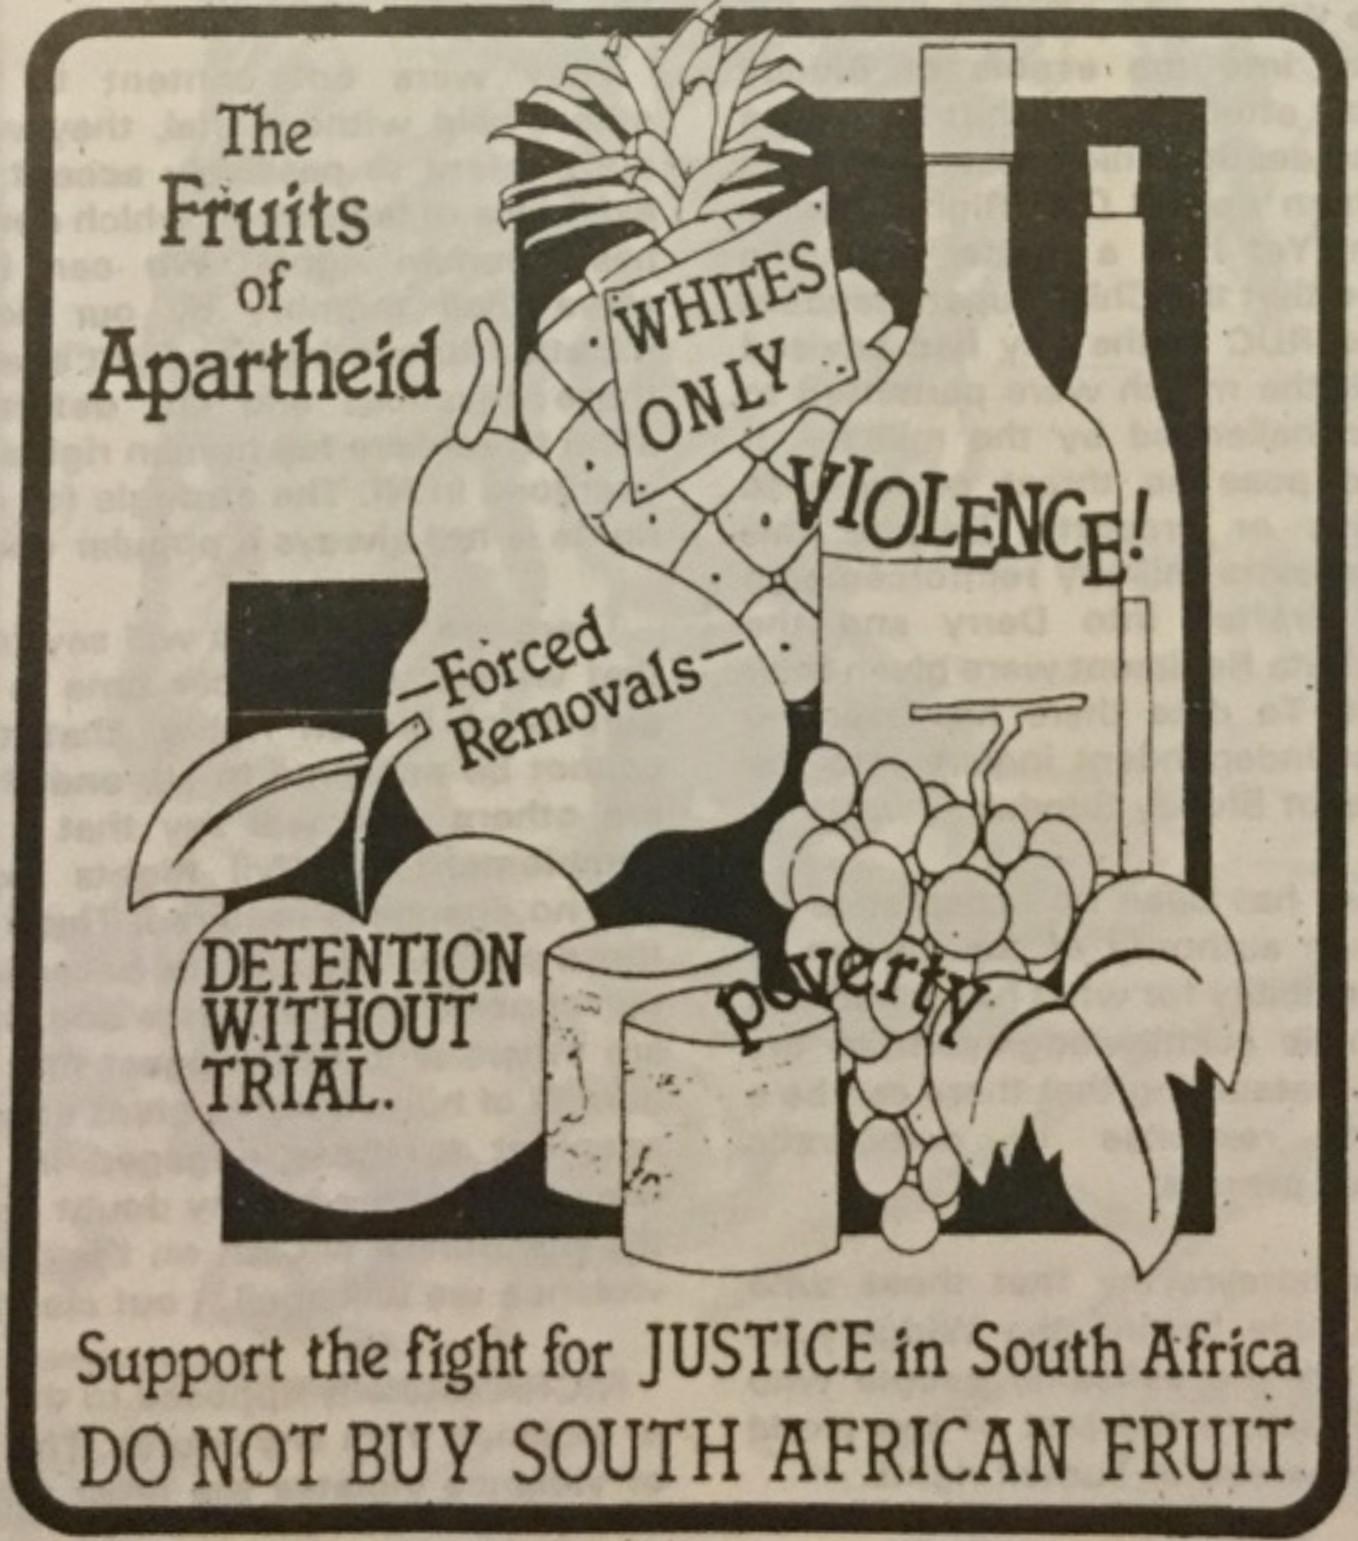 Titled The Fruits of Apartheid, a sketch of various fruit with labels reading: whites only; violence; Forced removals; detention without trial; and poverty. It is captioned: Support the fight for justice in South Africa; do not buy South African fruit.